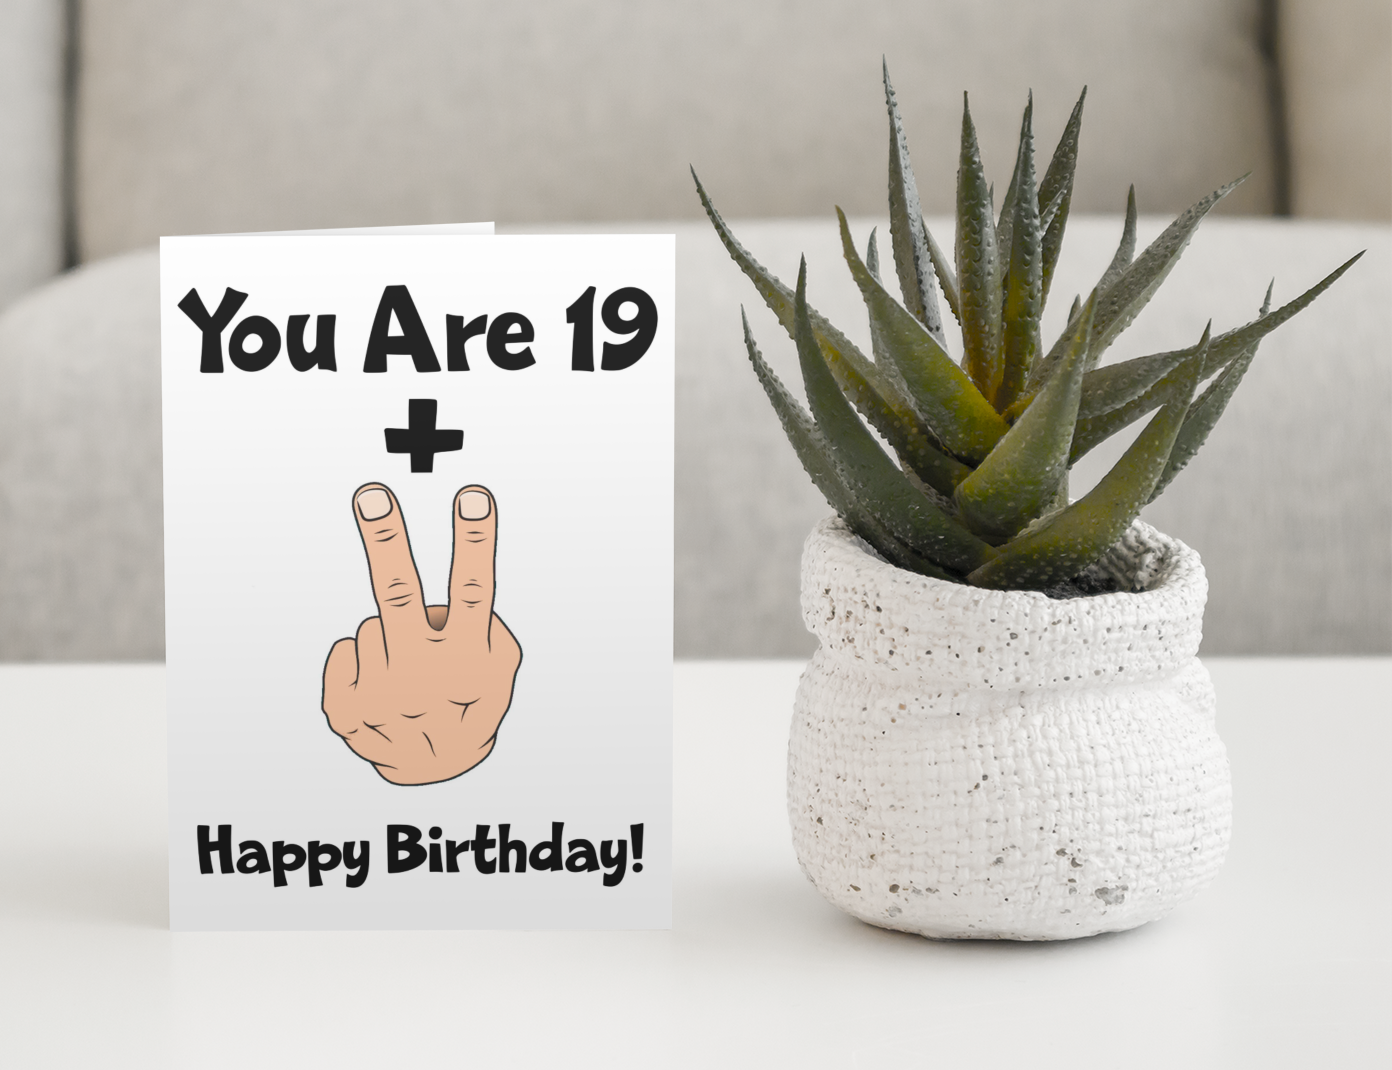 21st Birthday Card Gift - You Are 19 Plus Two Fingers - Funny Cute Rude Twenty First Birthday Present